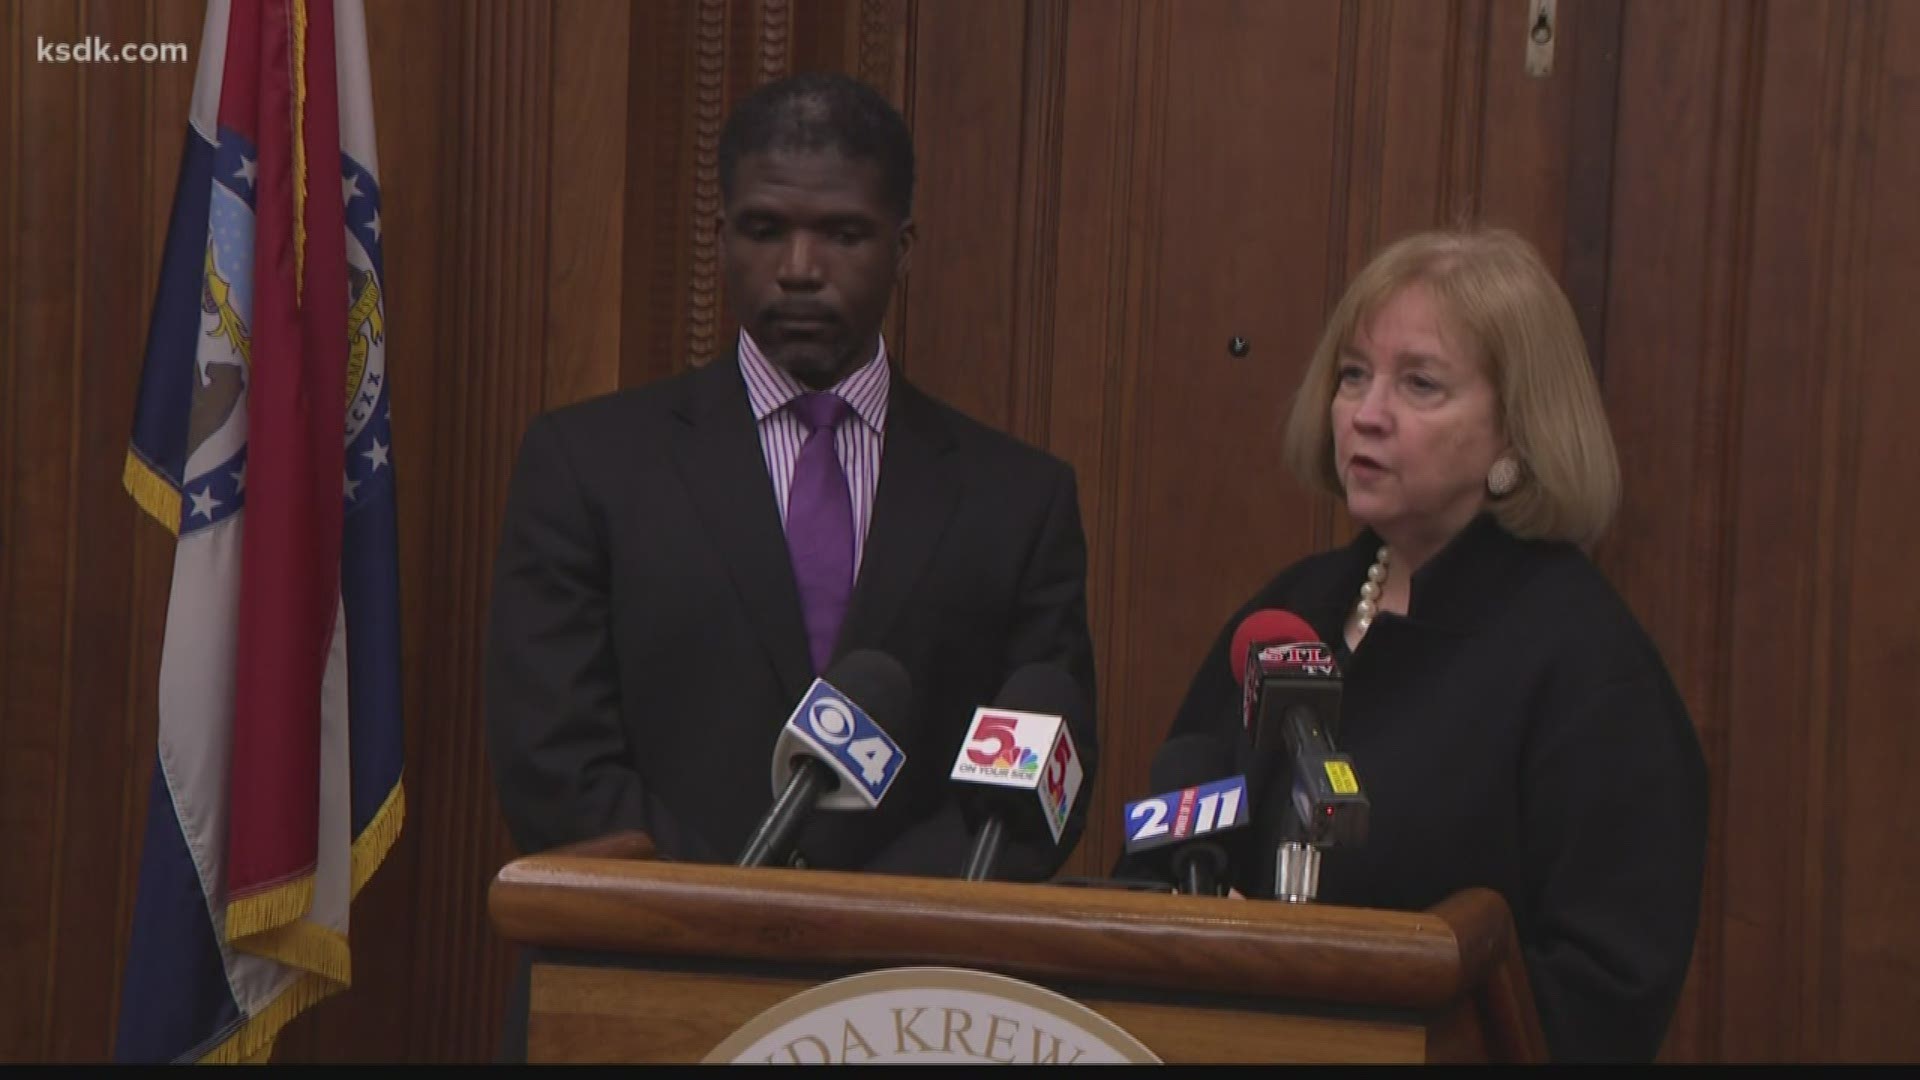 In a tweet, Mayor Krewson said she and the St. Louis Department of Health received word of the second presumptive positive case in the city